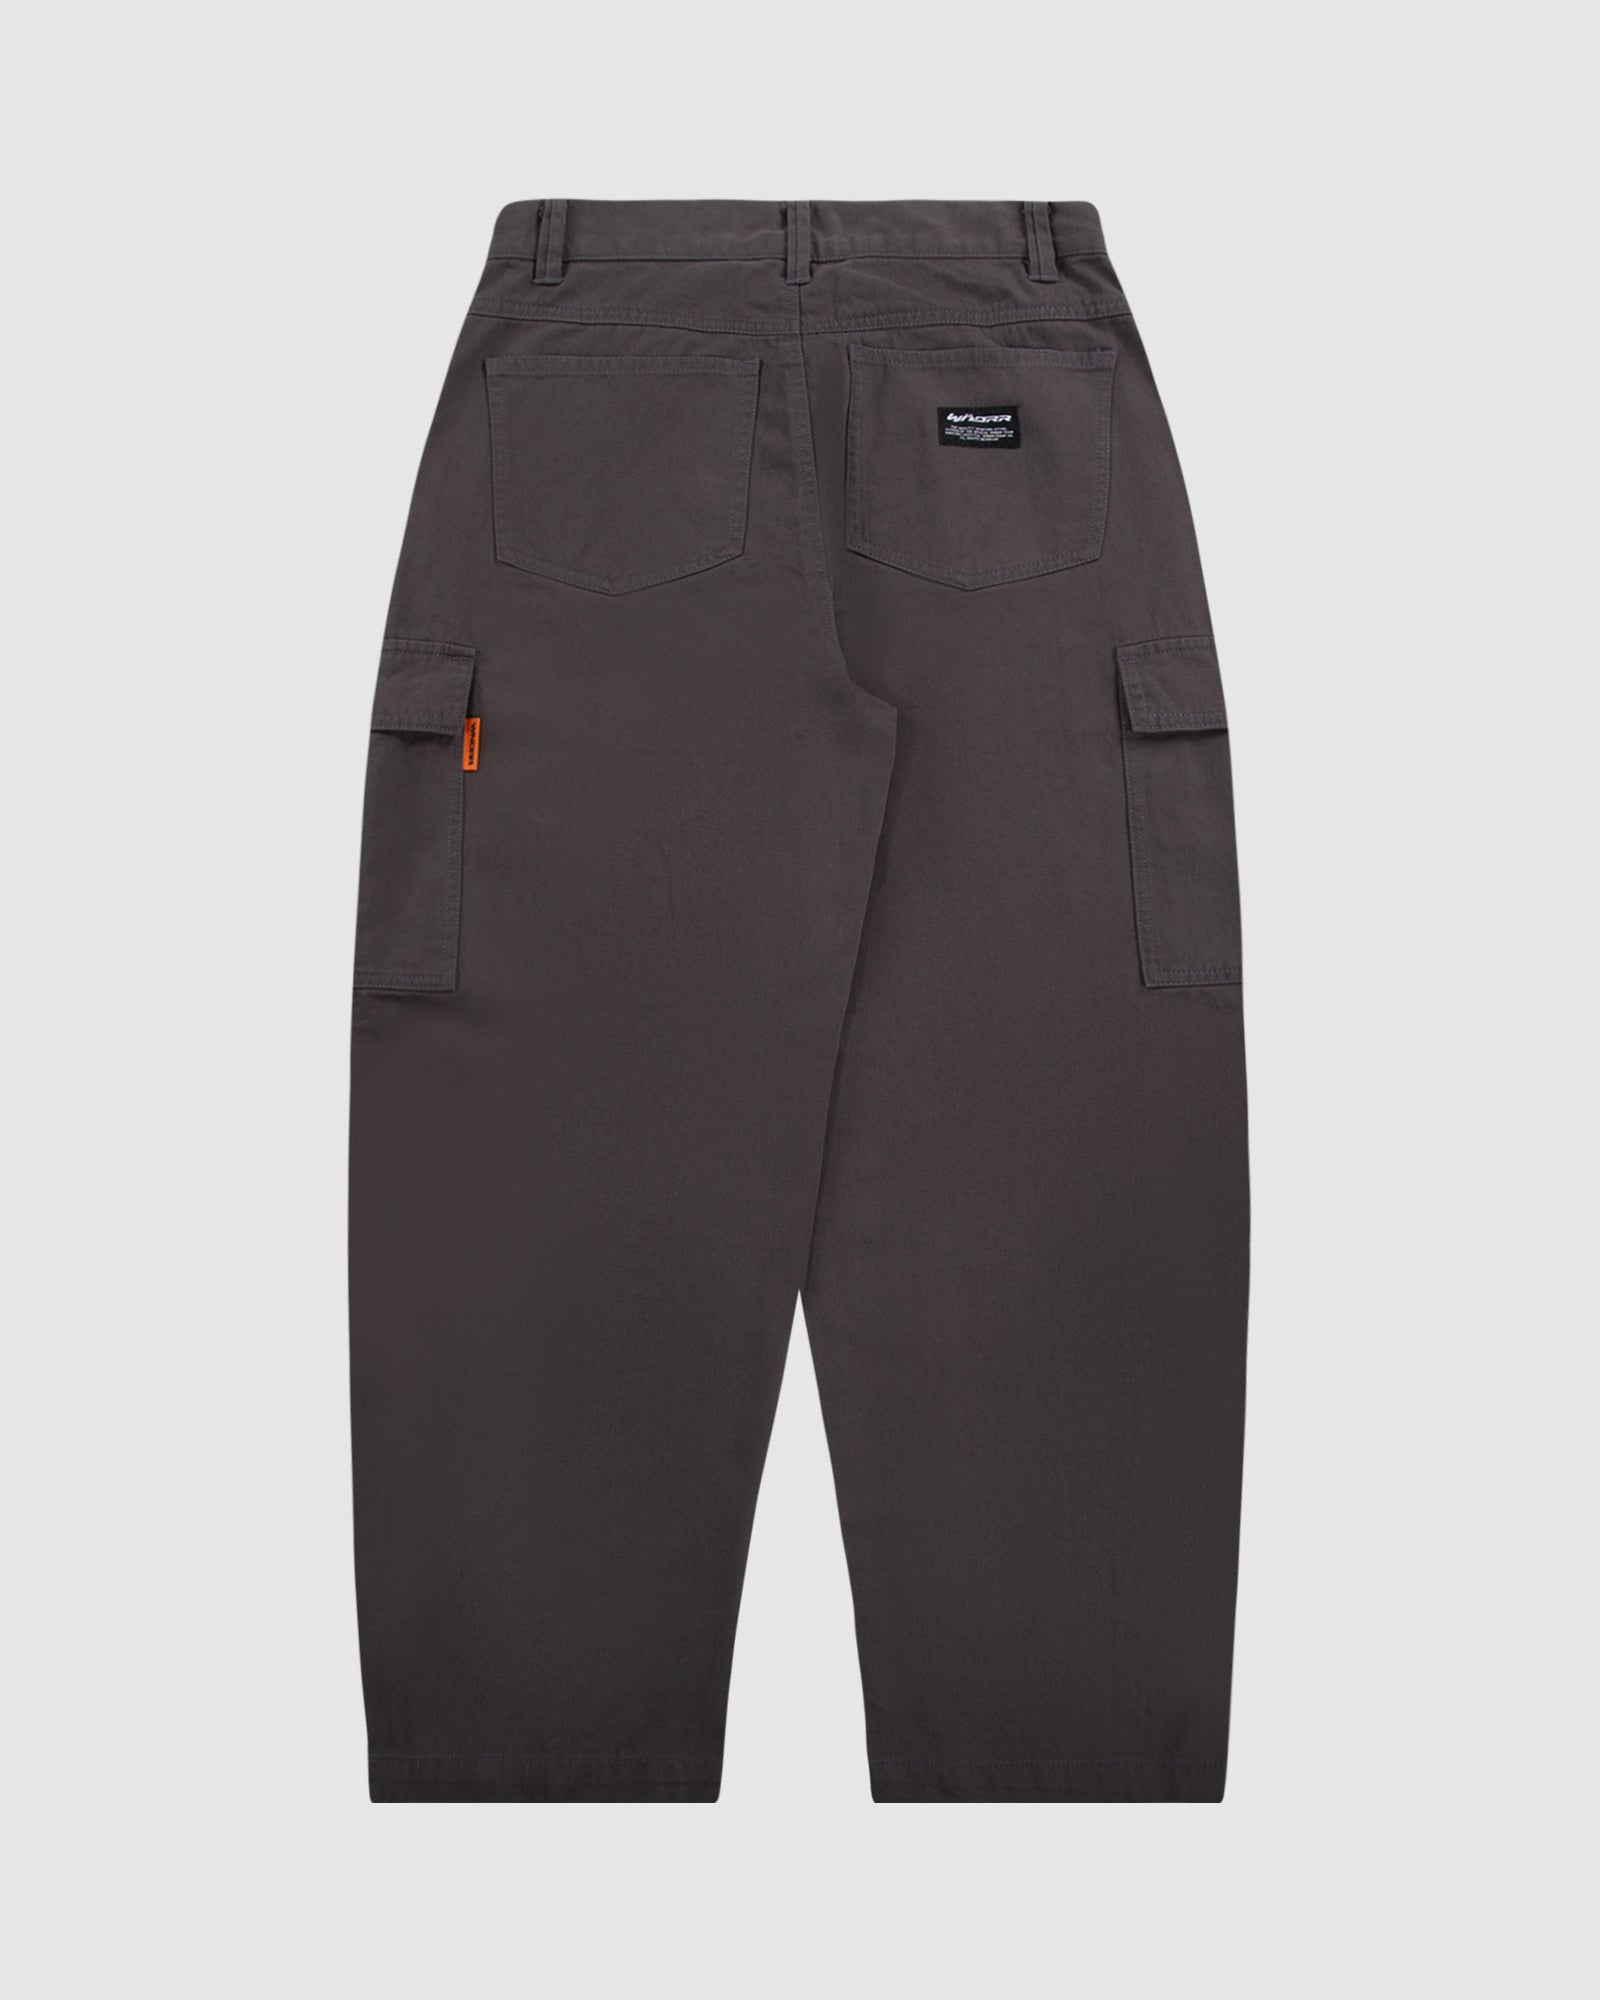 BOOSTER CARGO PANT - SLATE